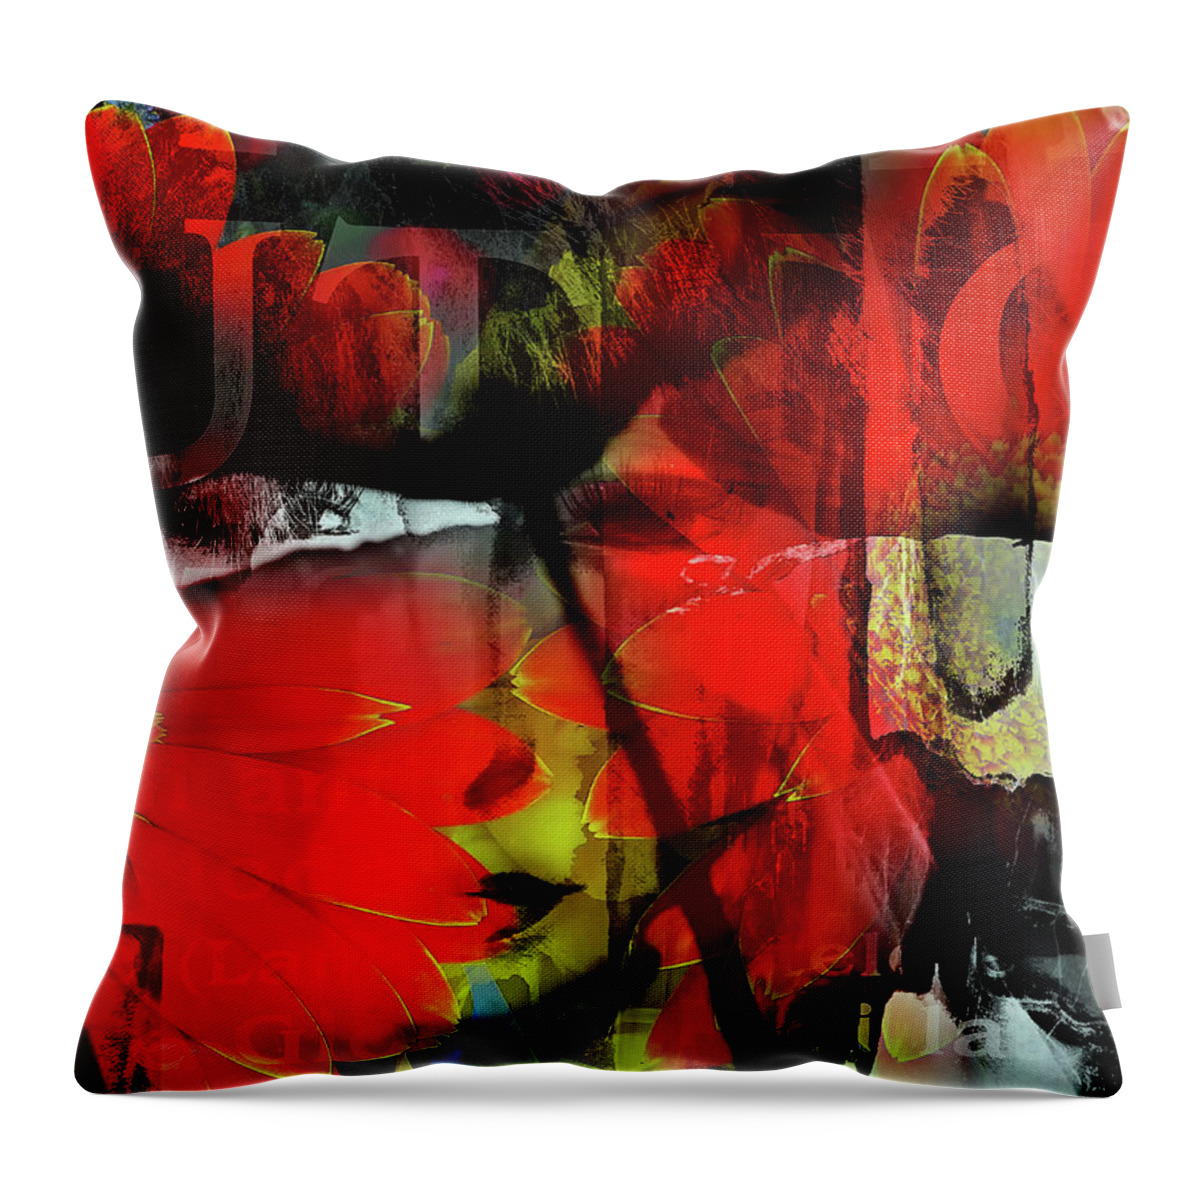 Face Throw Pillow featuring the digital art Behind the poppies by Gabi Hampe